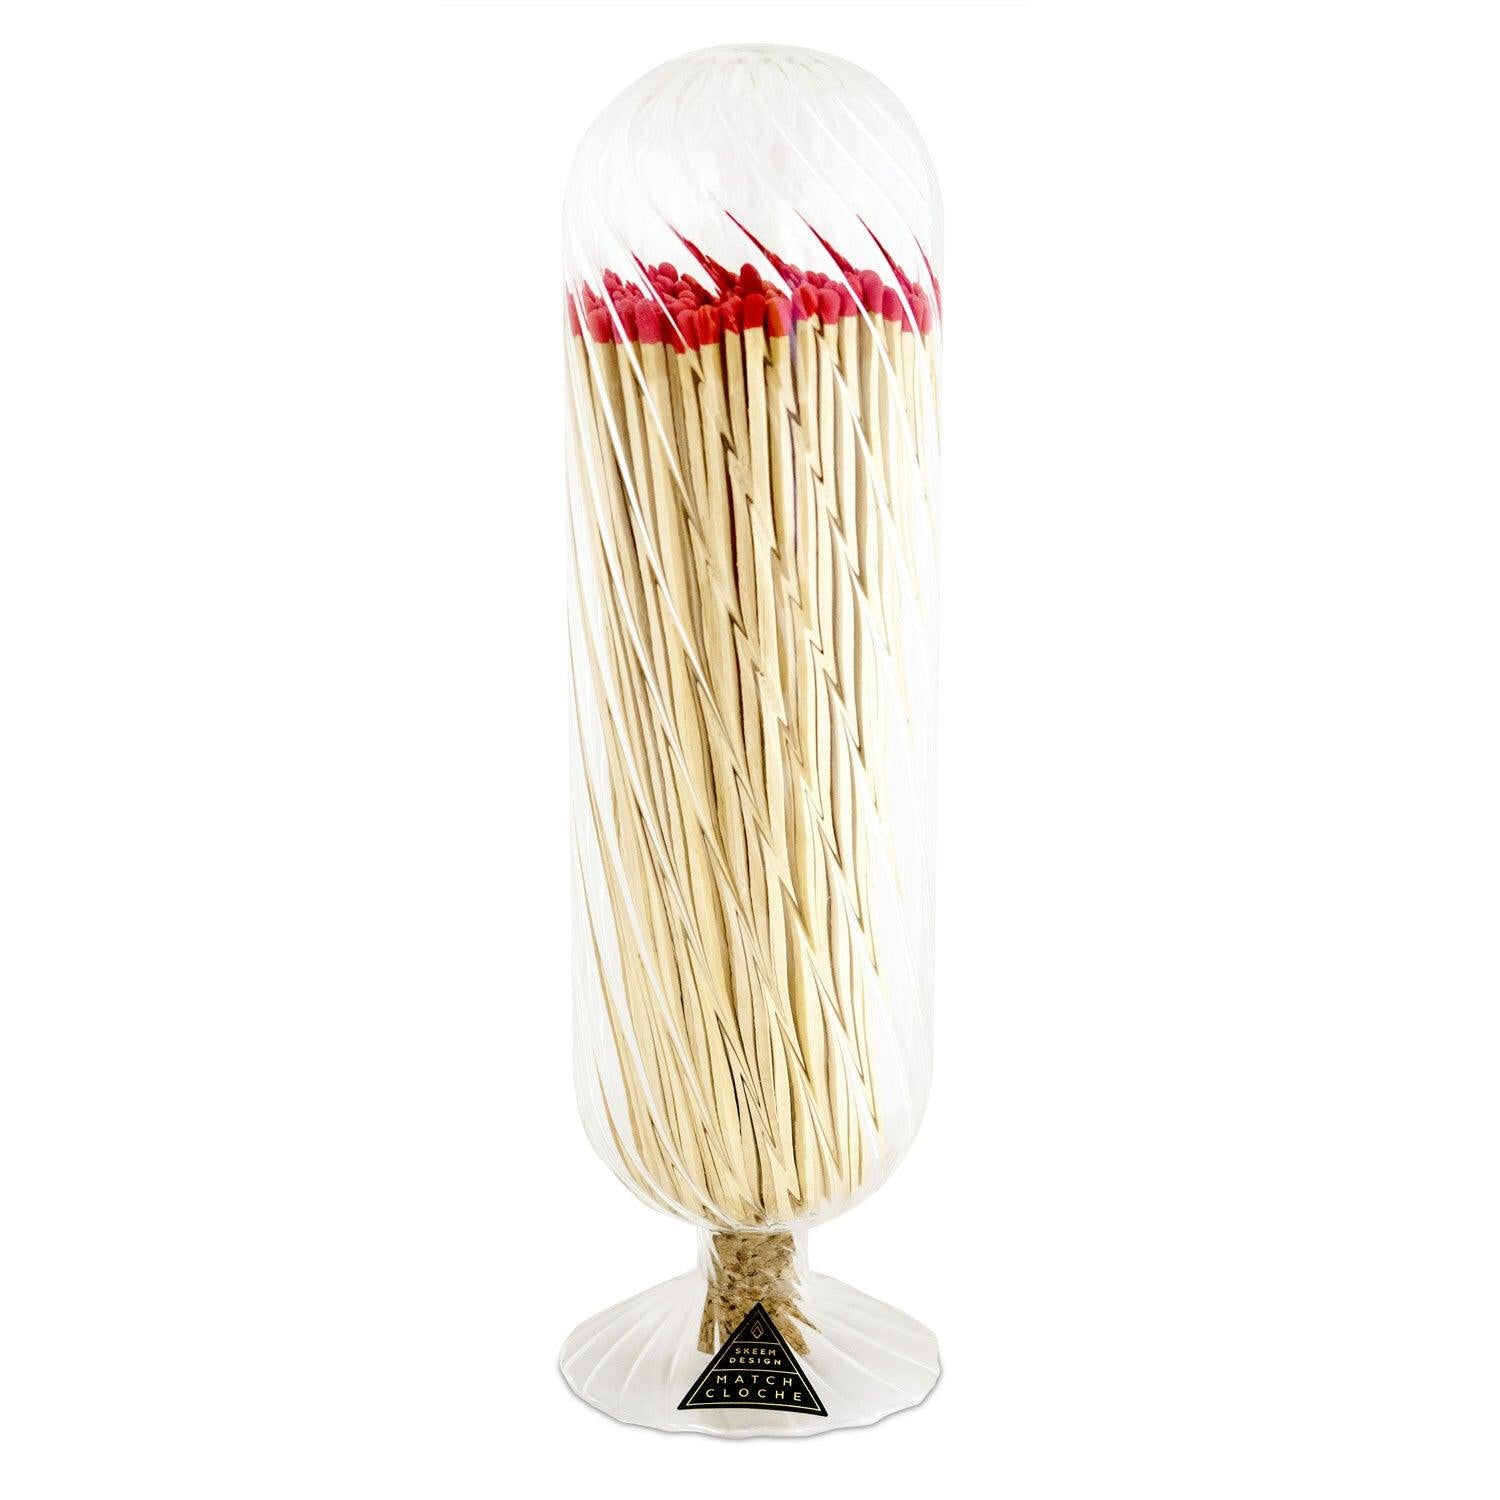 Ribbed Fireplace Match Cloche Red - Elegant Linen